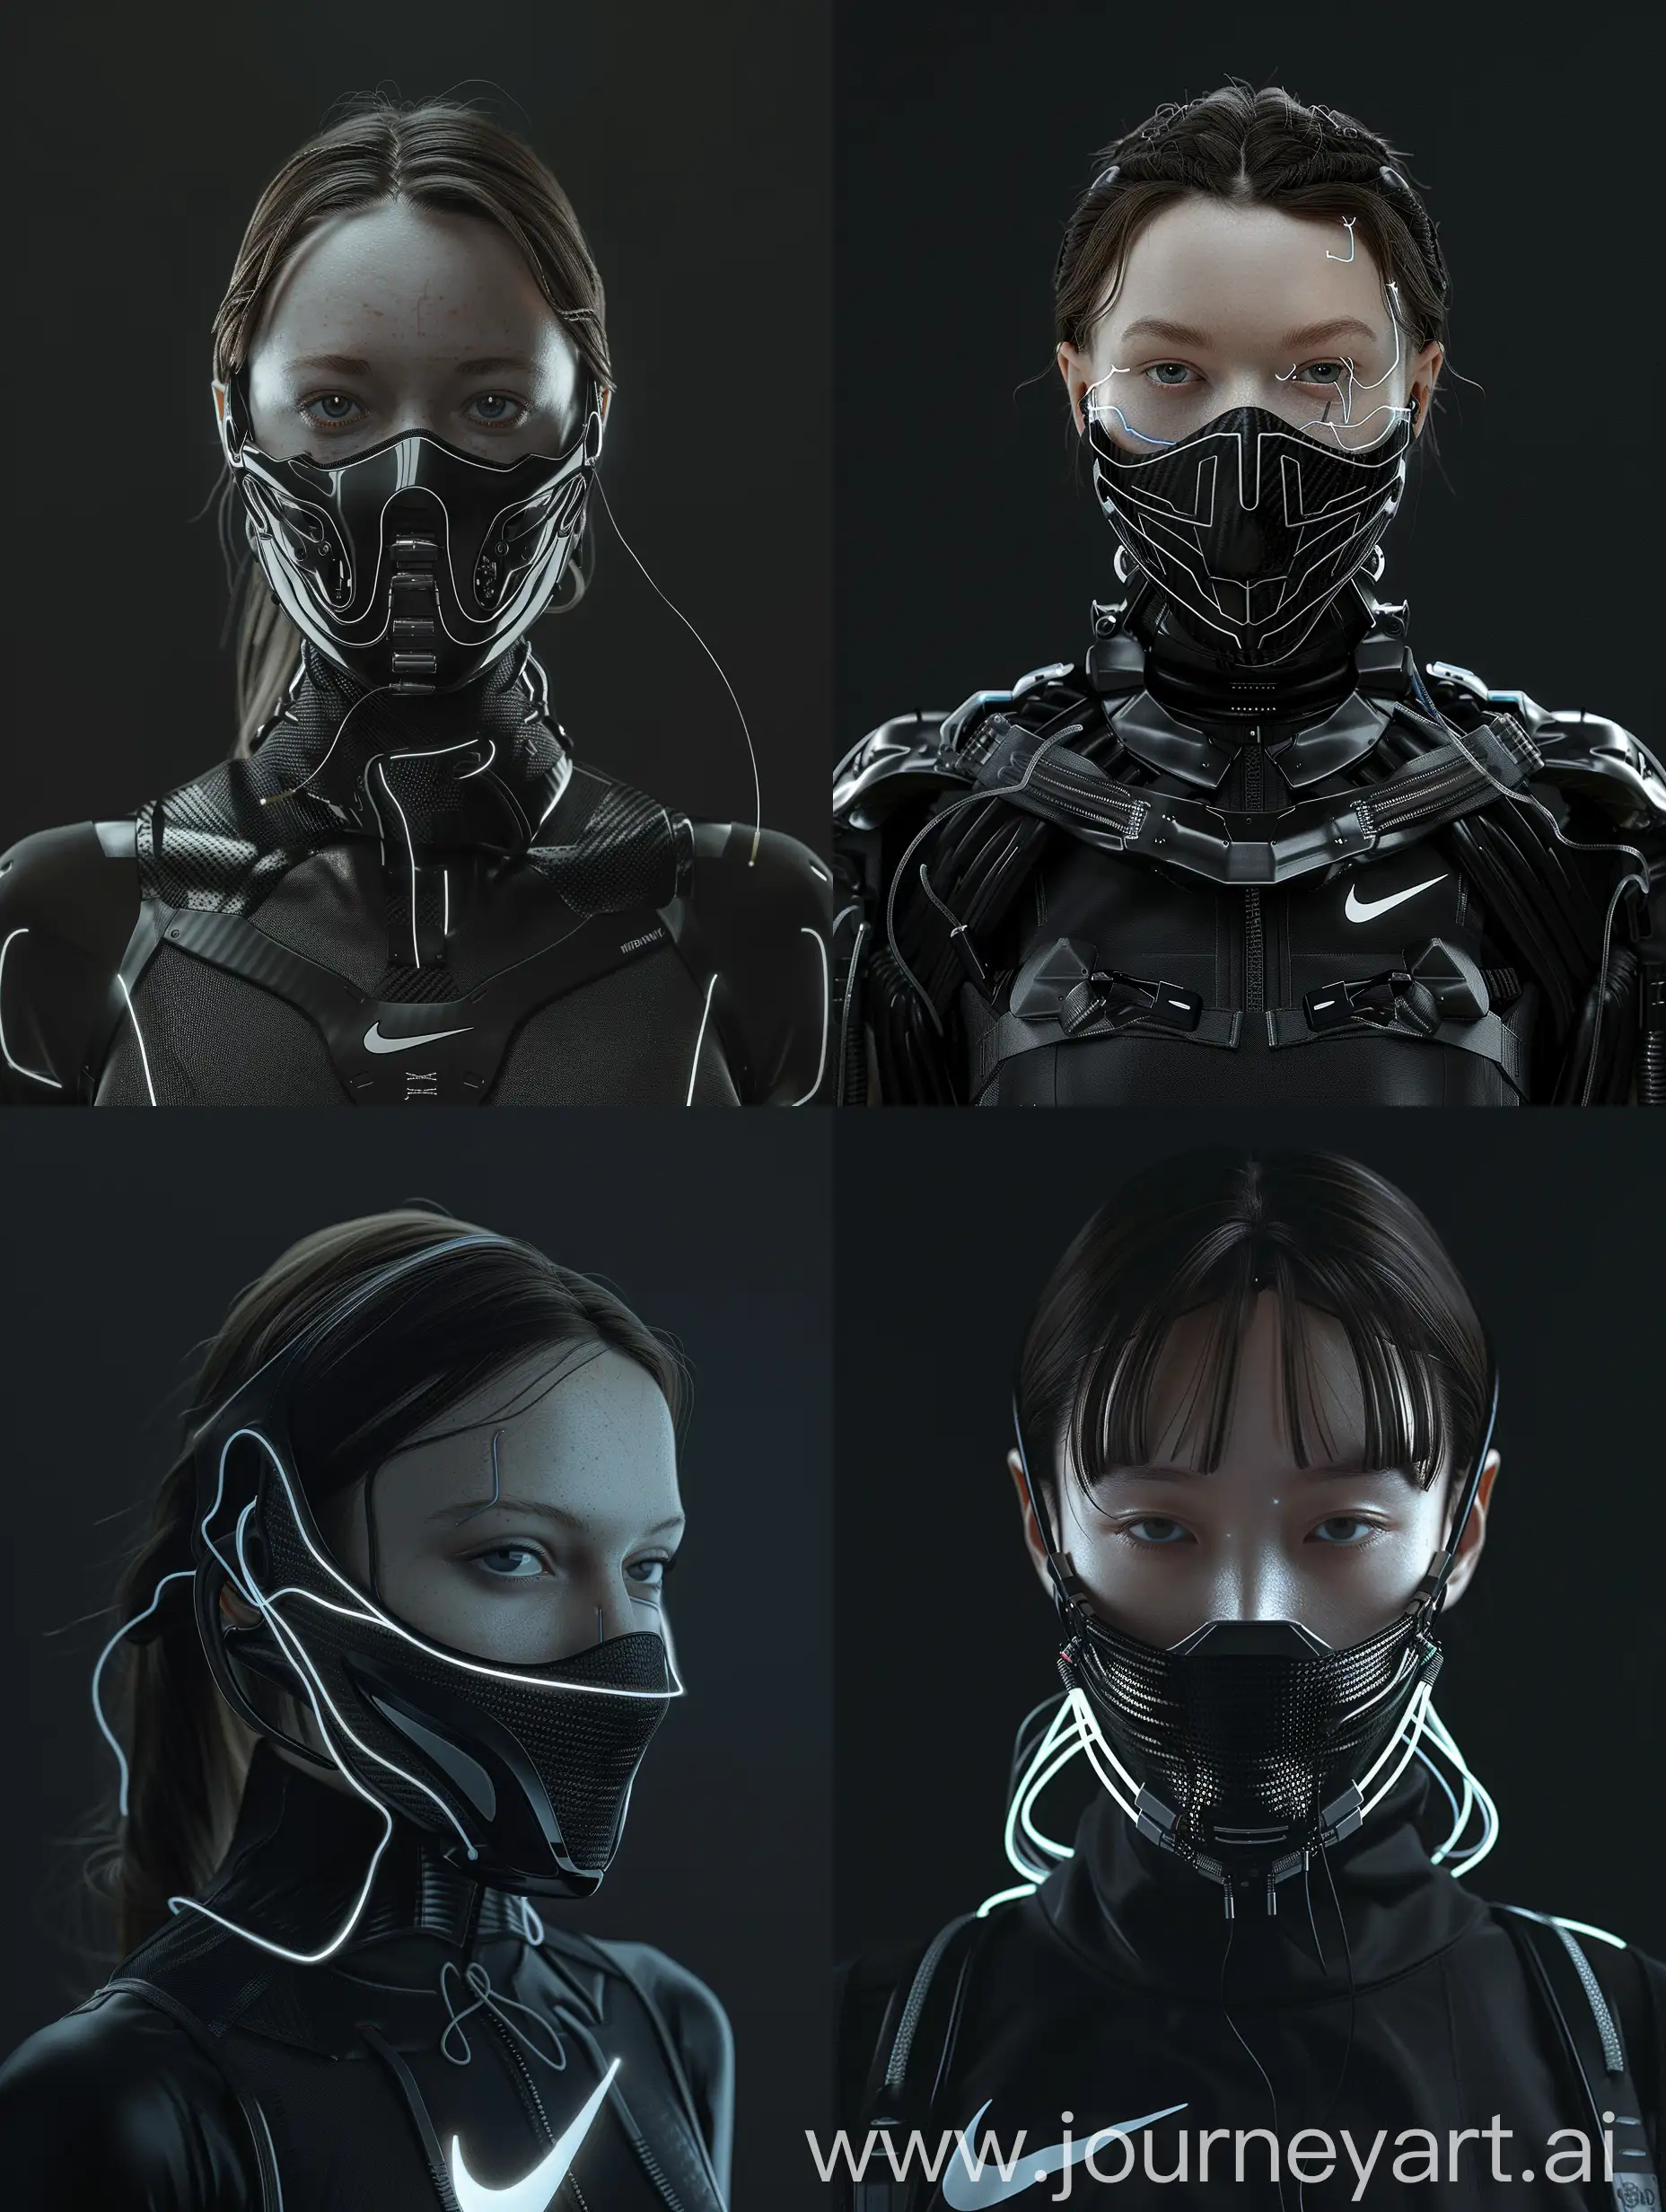 Futuristic-Cyberpunk-Character-with-Advanced-Technology-and-Intricate-Design